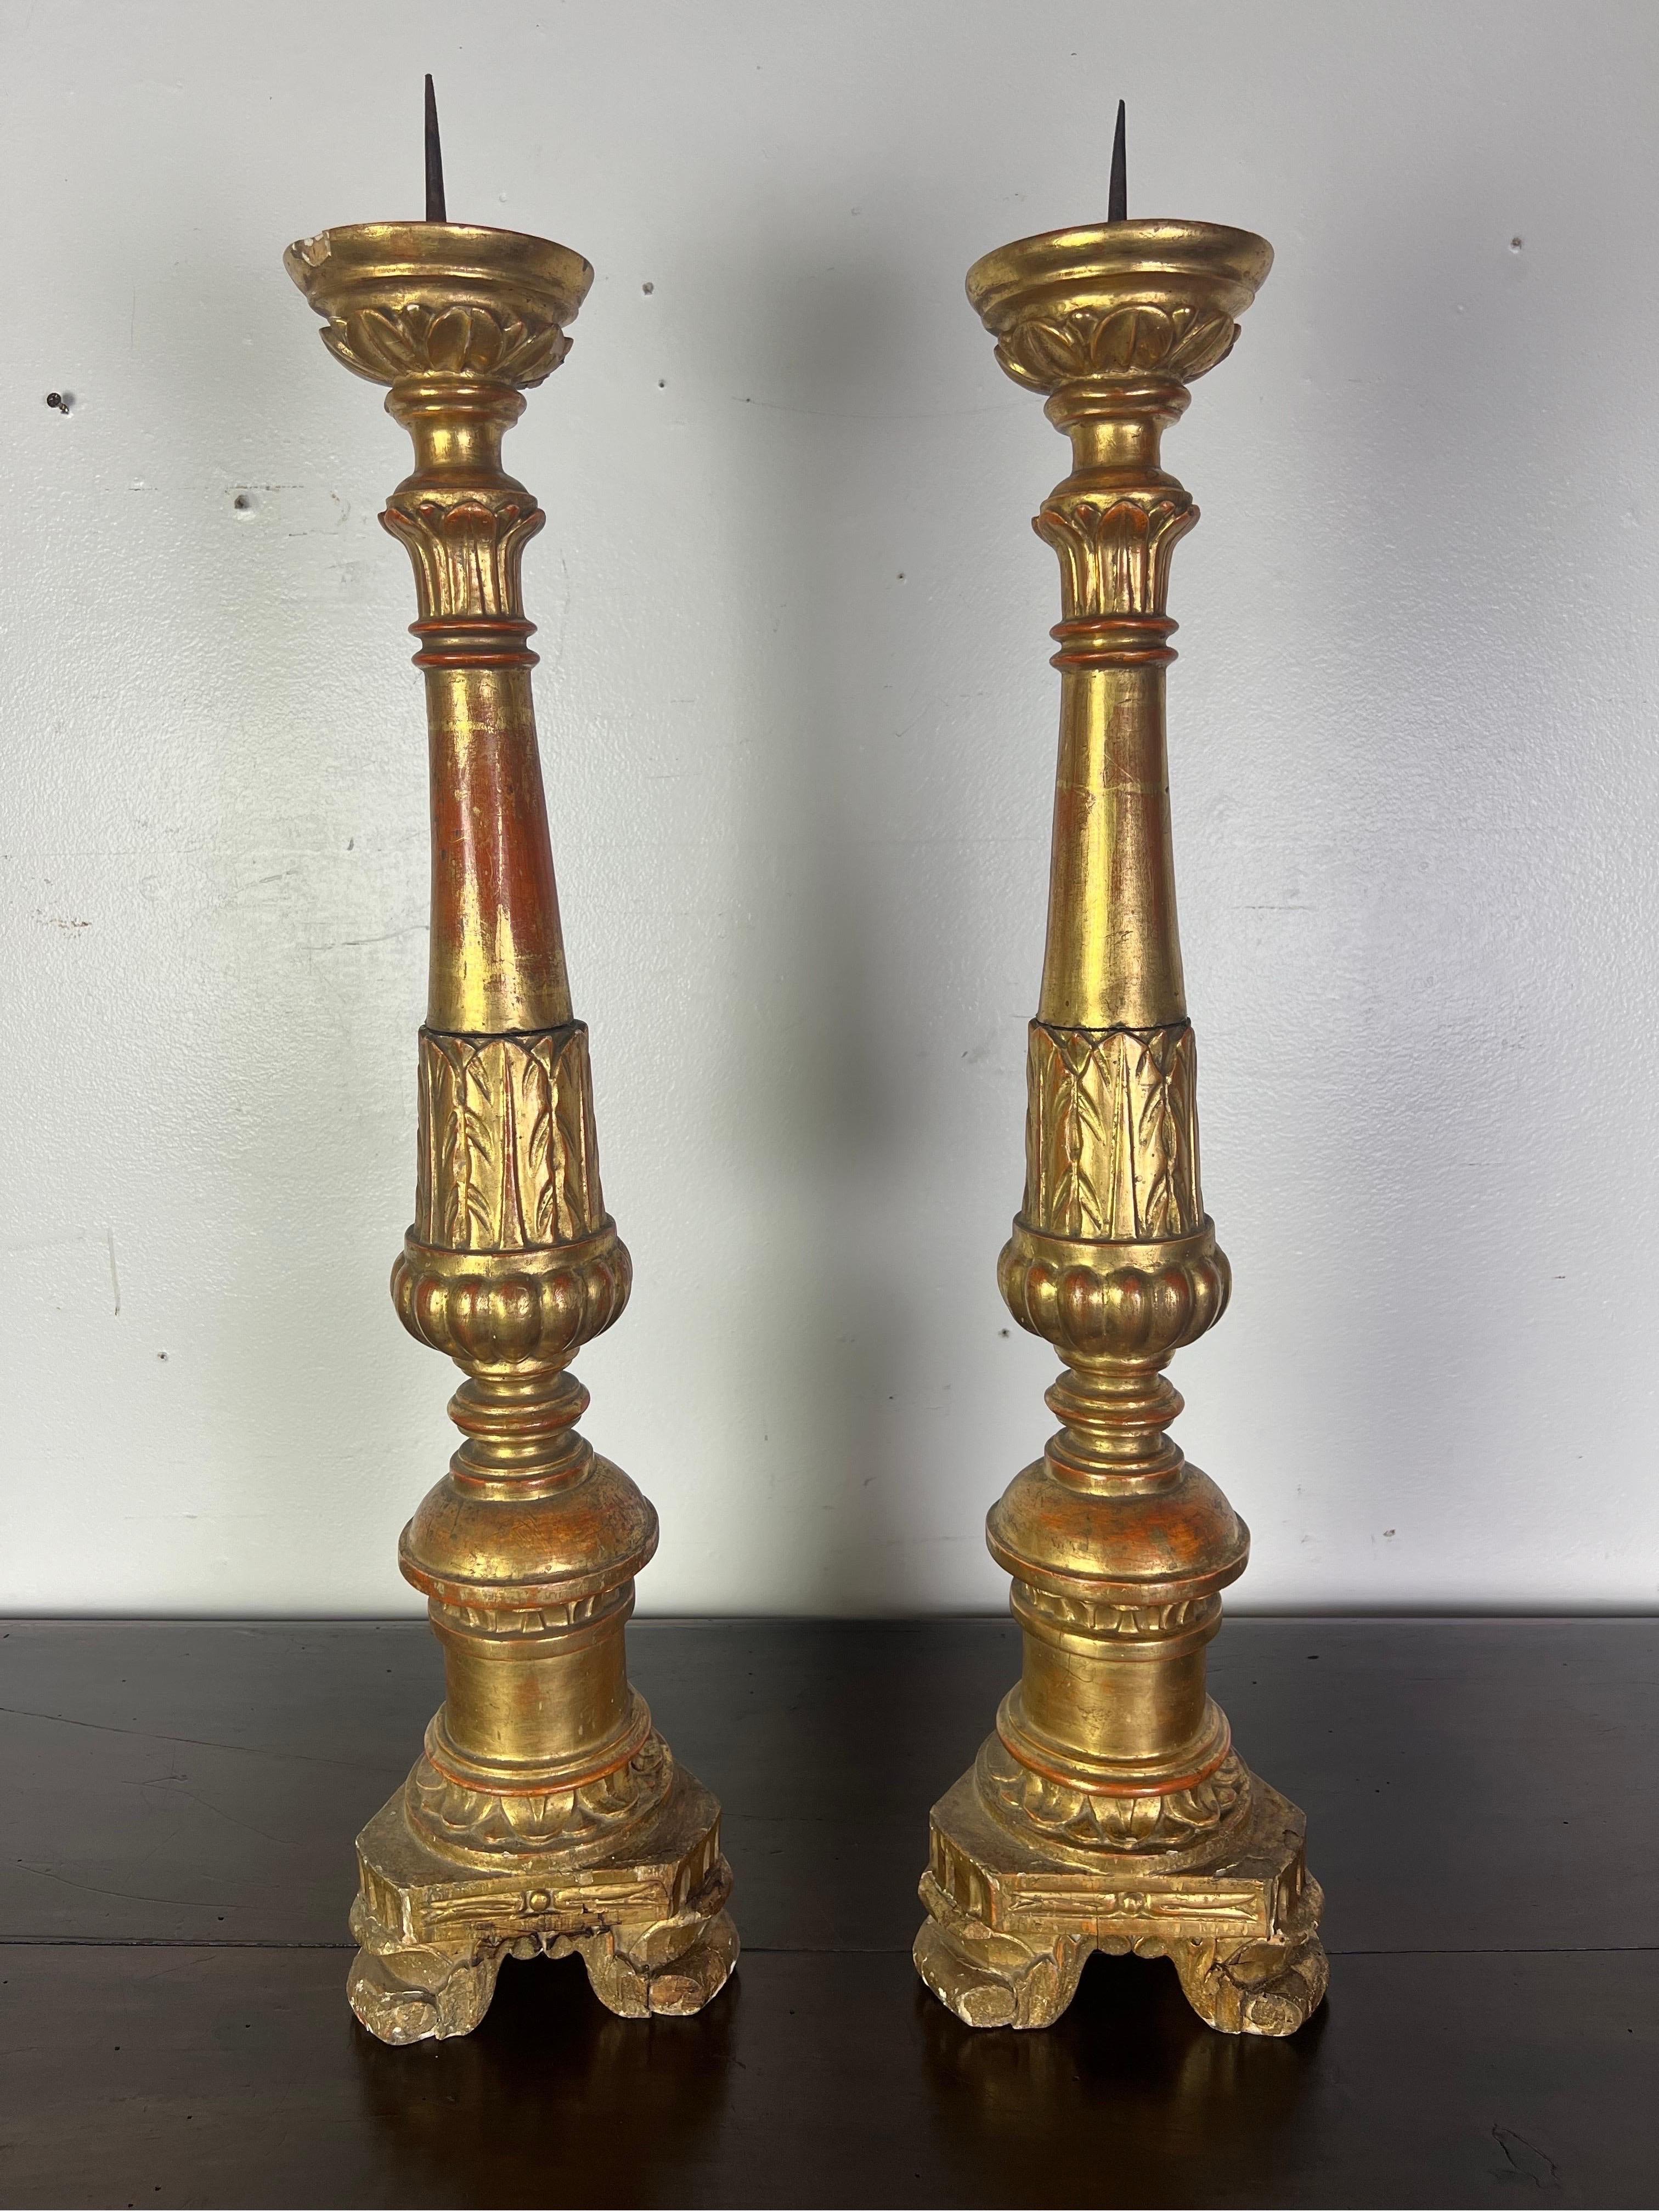 A 19th-century pair of Italian giltwood candlesticks with prickets and a beautifully carved acanthus leaf design throughout is a testament to the opulent and detailed craftsmanship of the period.  Giltwood refers to wood that has been gilded-covered